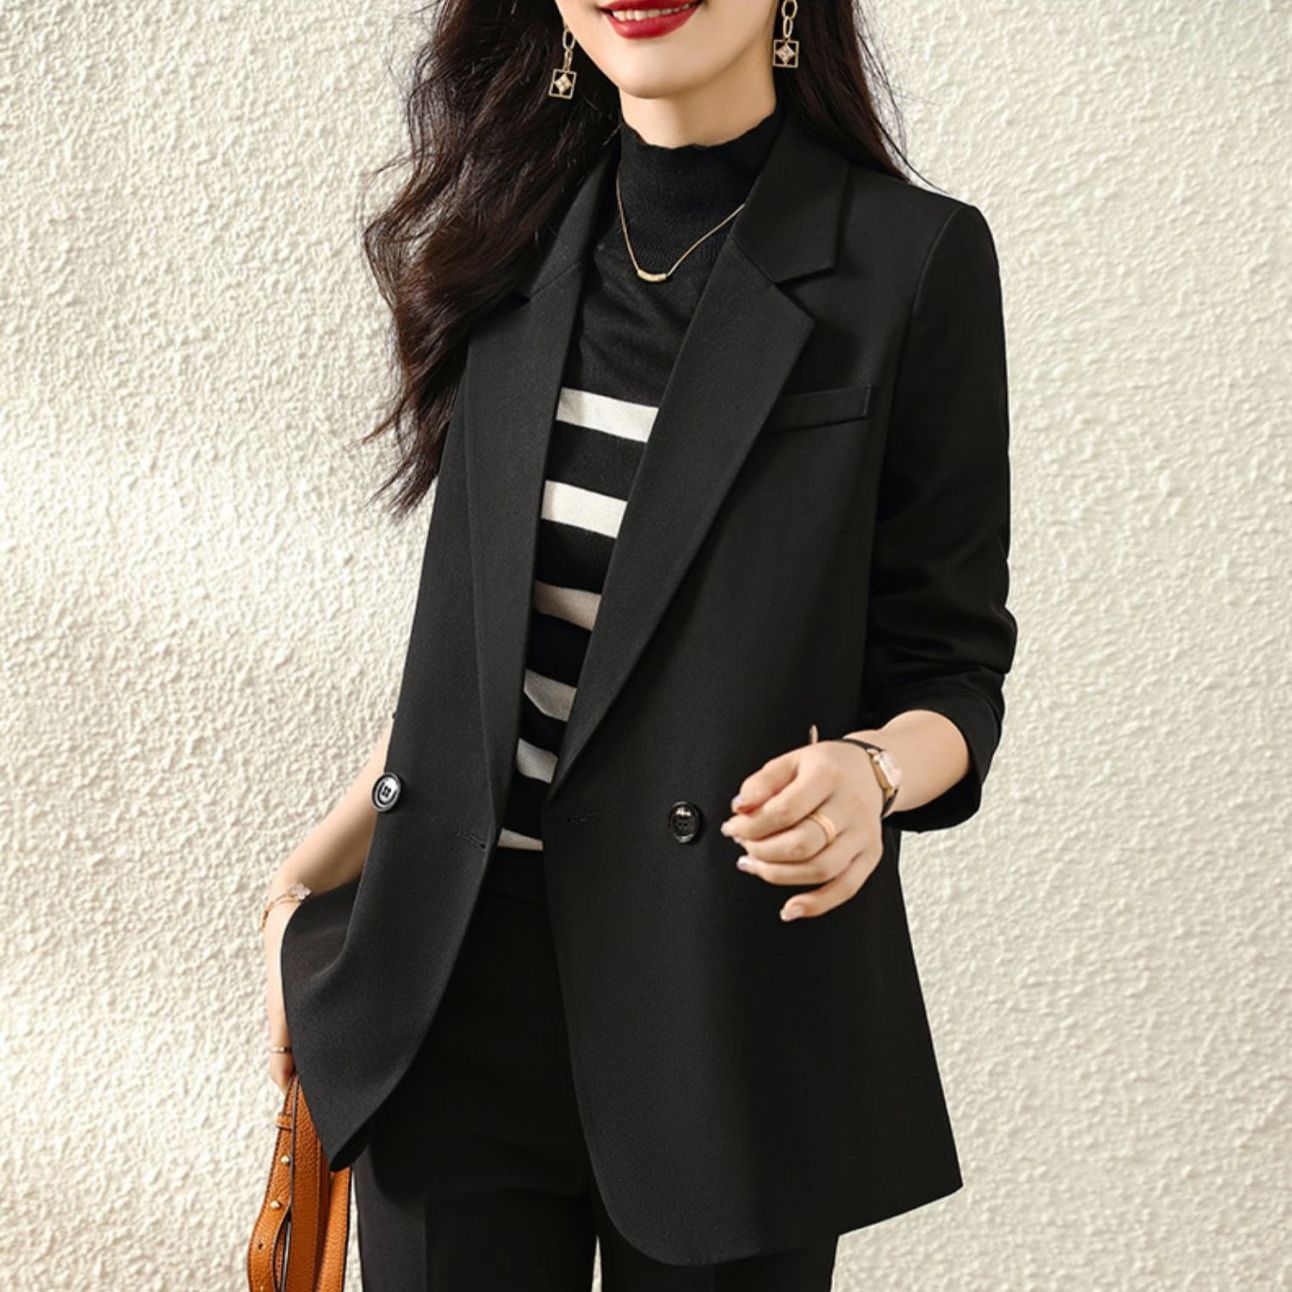 Small suit jacket women's 2022 spring and autumn new temperament high-end small man into the autumn slit shoulder pad suit jacket